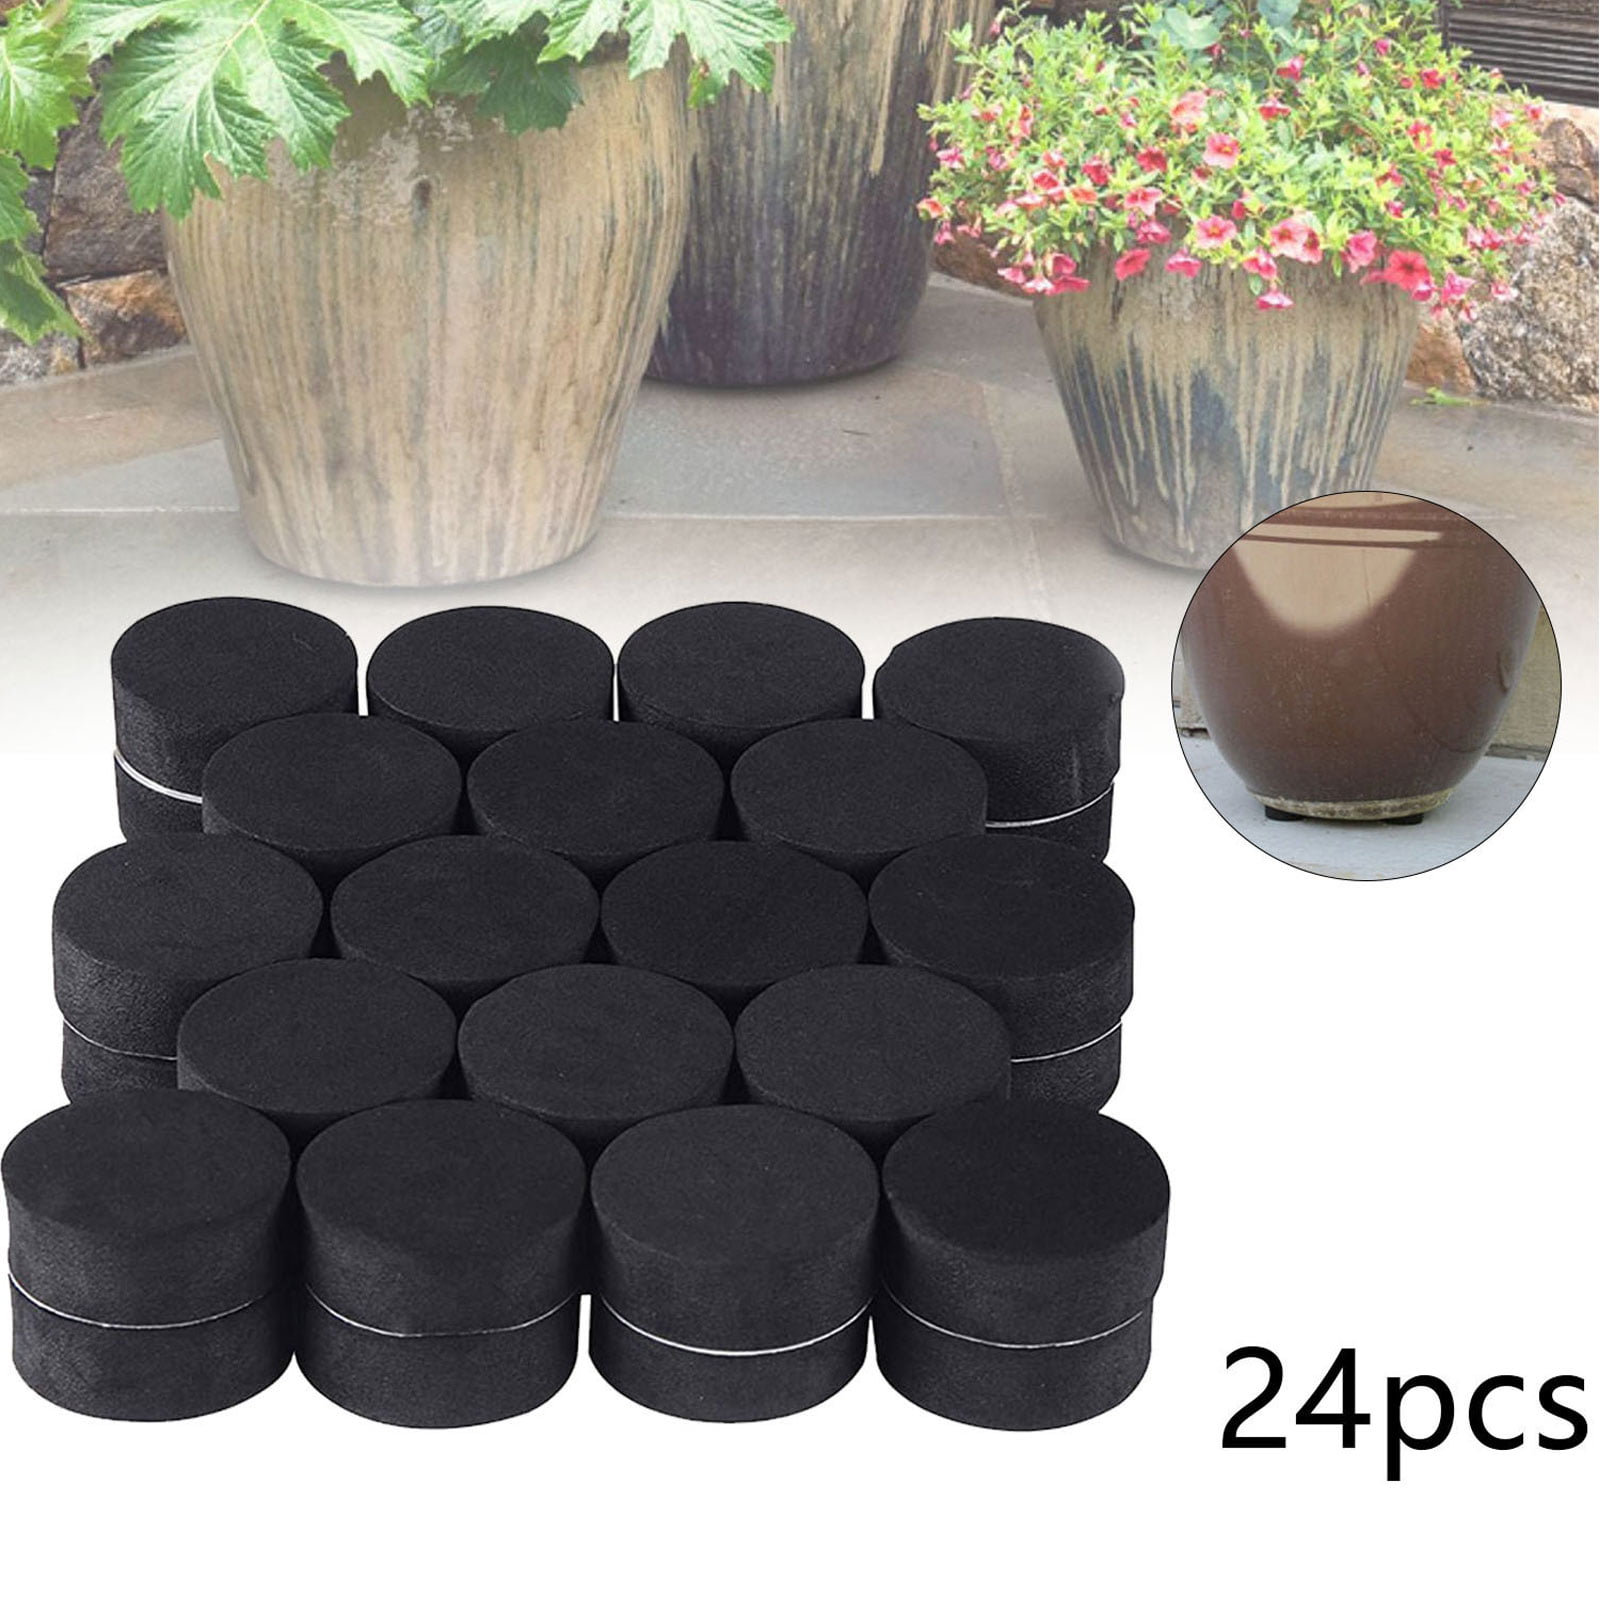 12 Pack of Invisible Low Profile Home & Garden Flower Plant Pot EVA Feet Risers